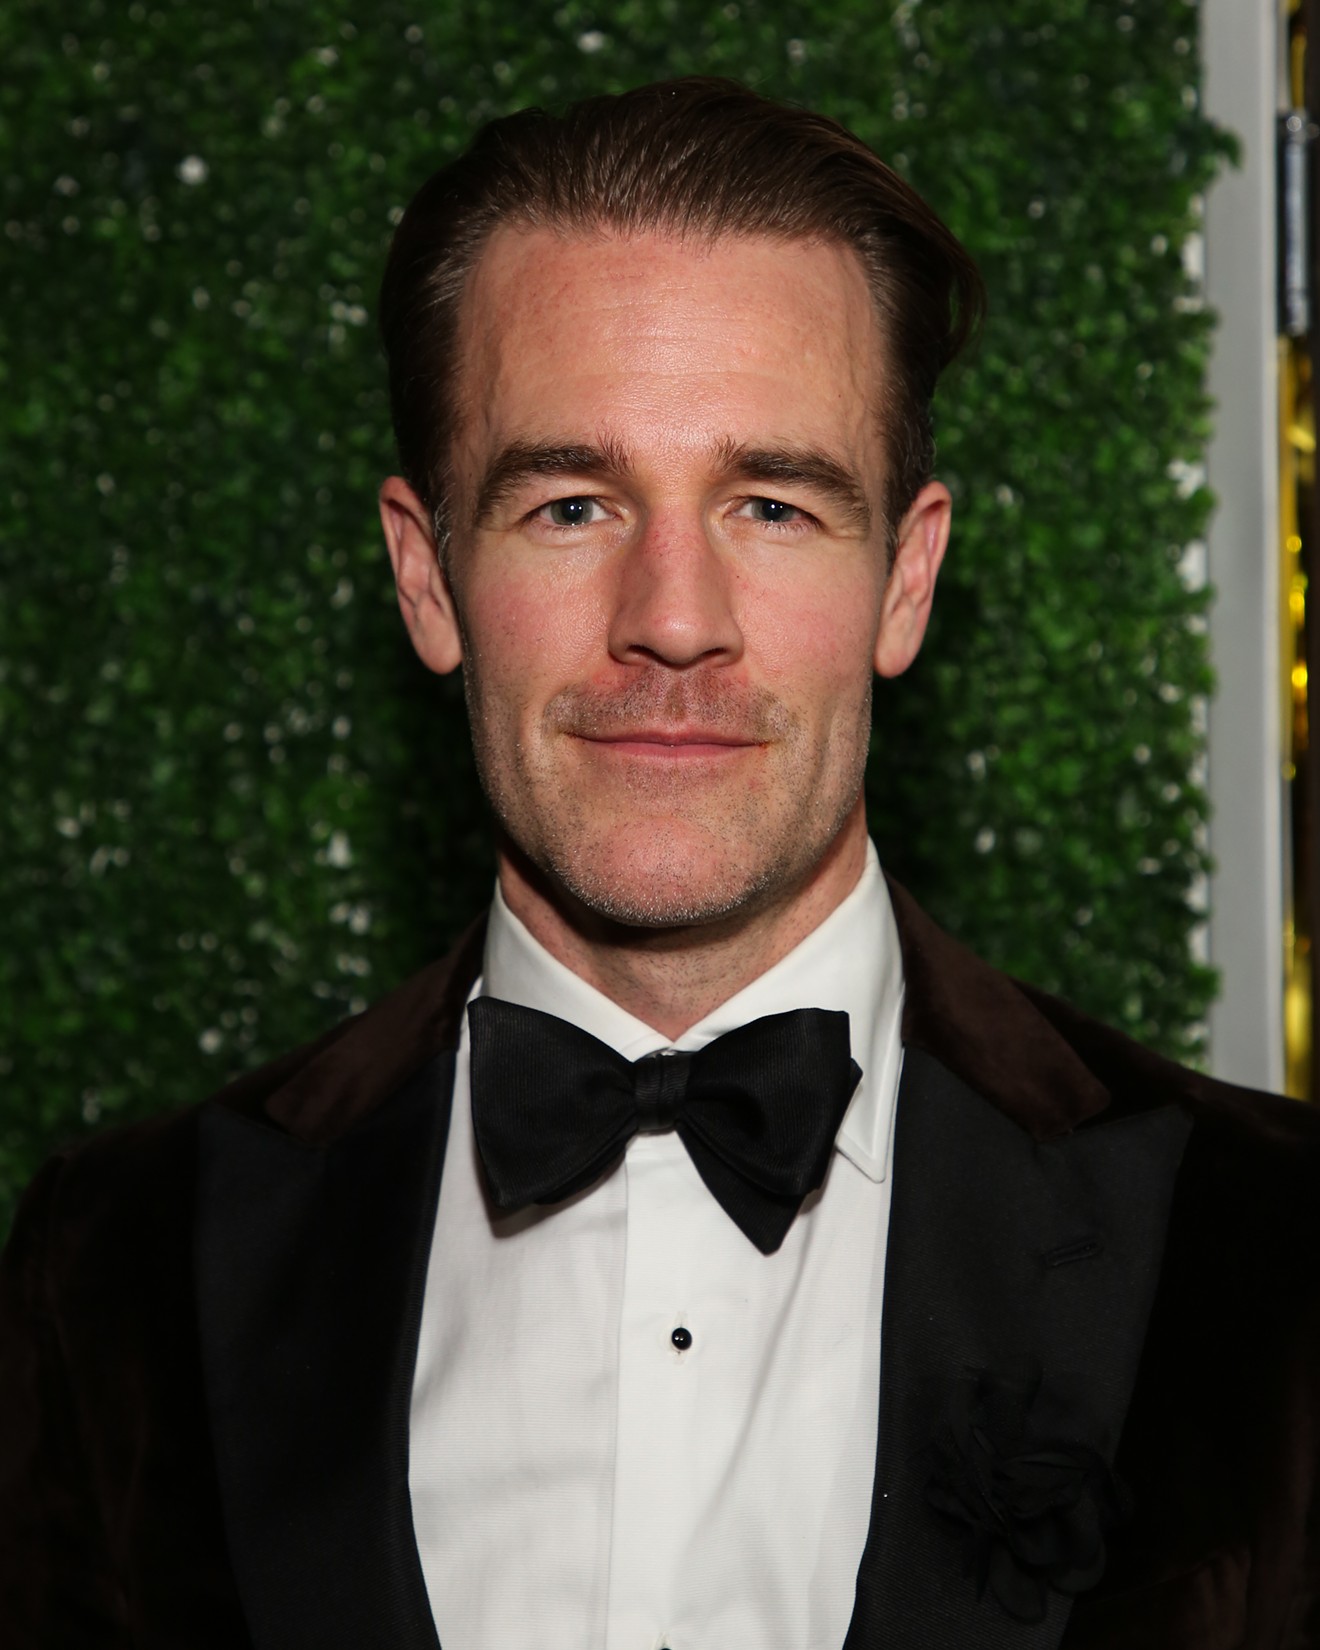 Dawson should've stayed back in the creek. James Van der Beek's Texas accent in Varsity Blues made us really not want his life. Now we get to laugh WITH him at a Dallas screening.